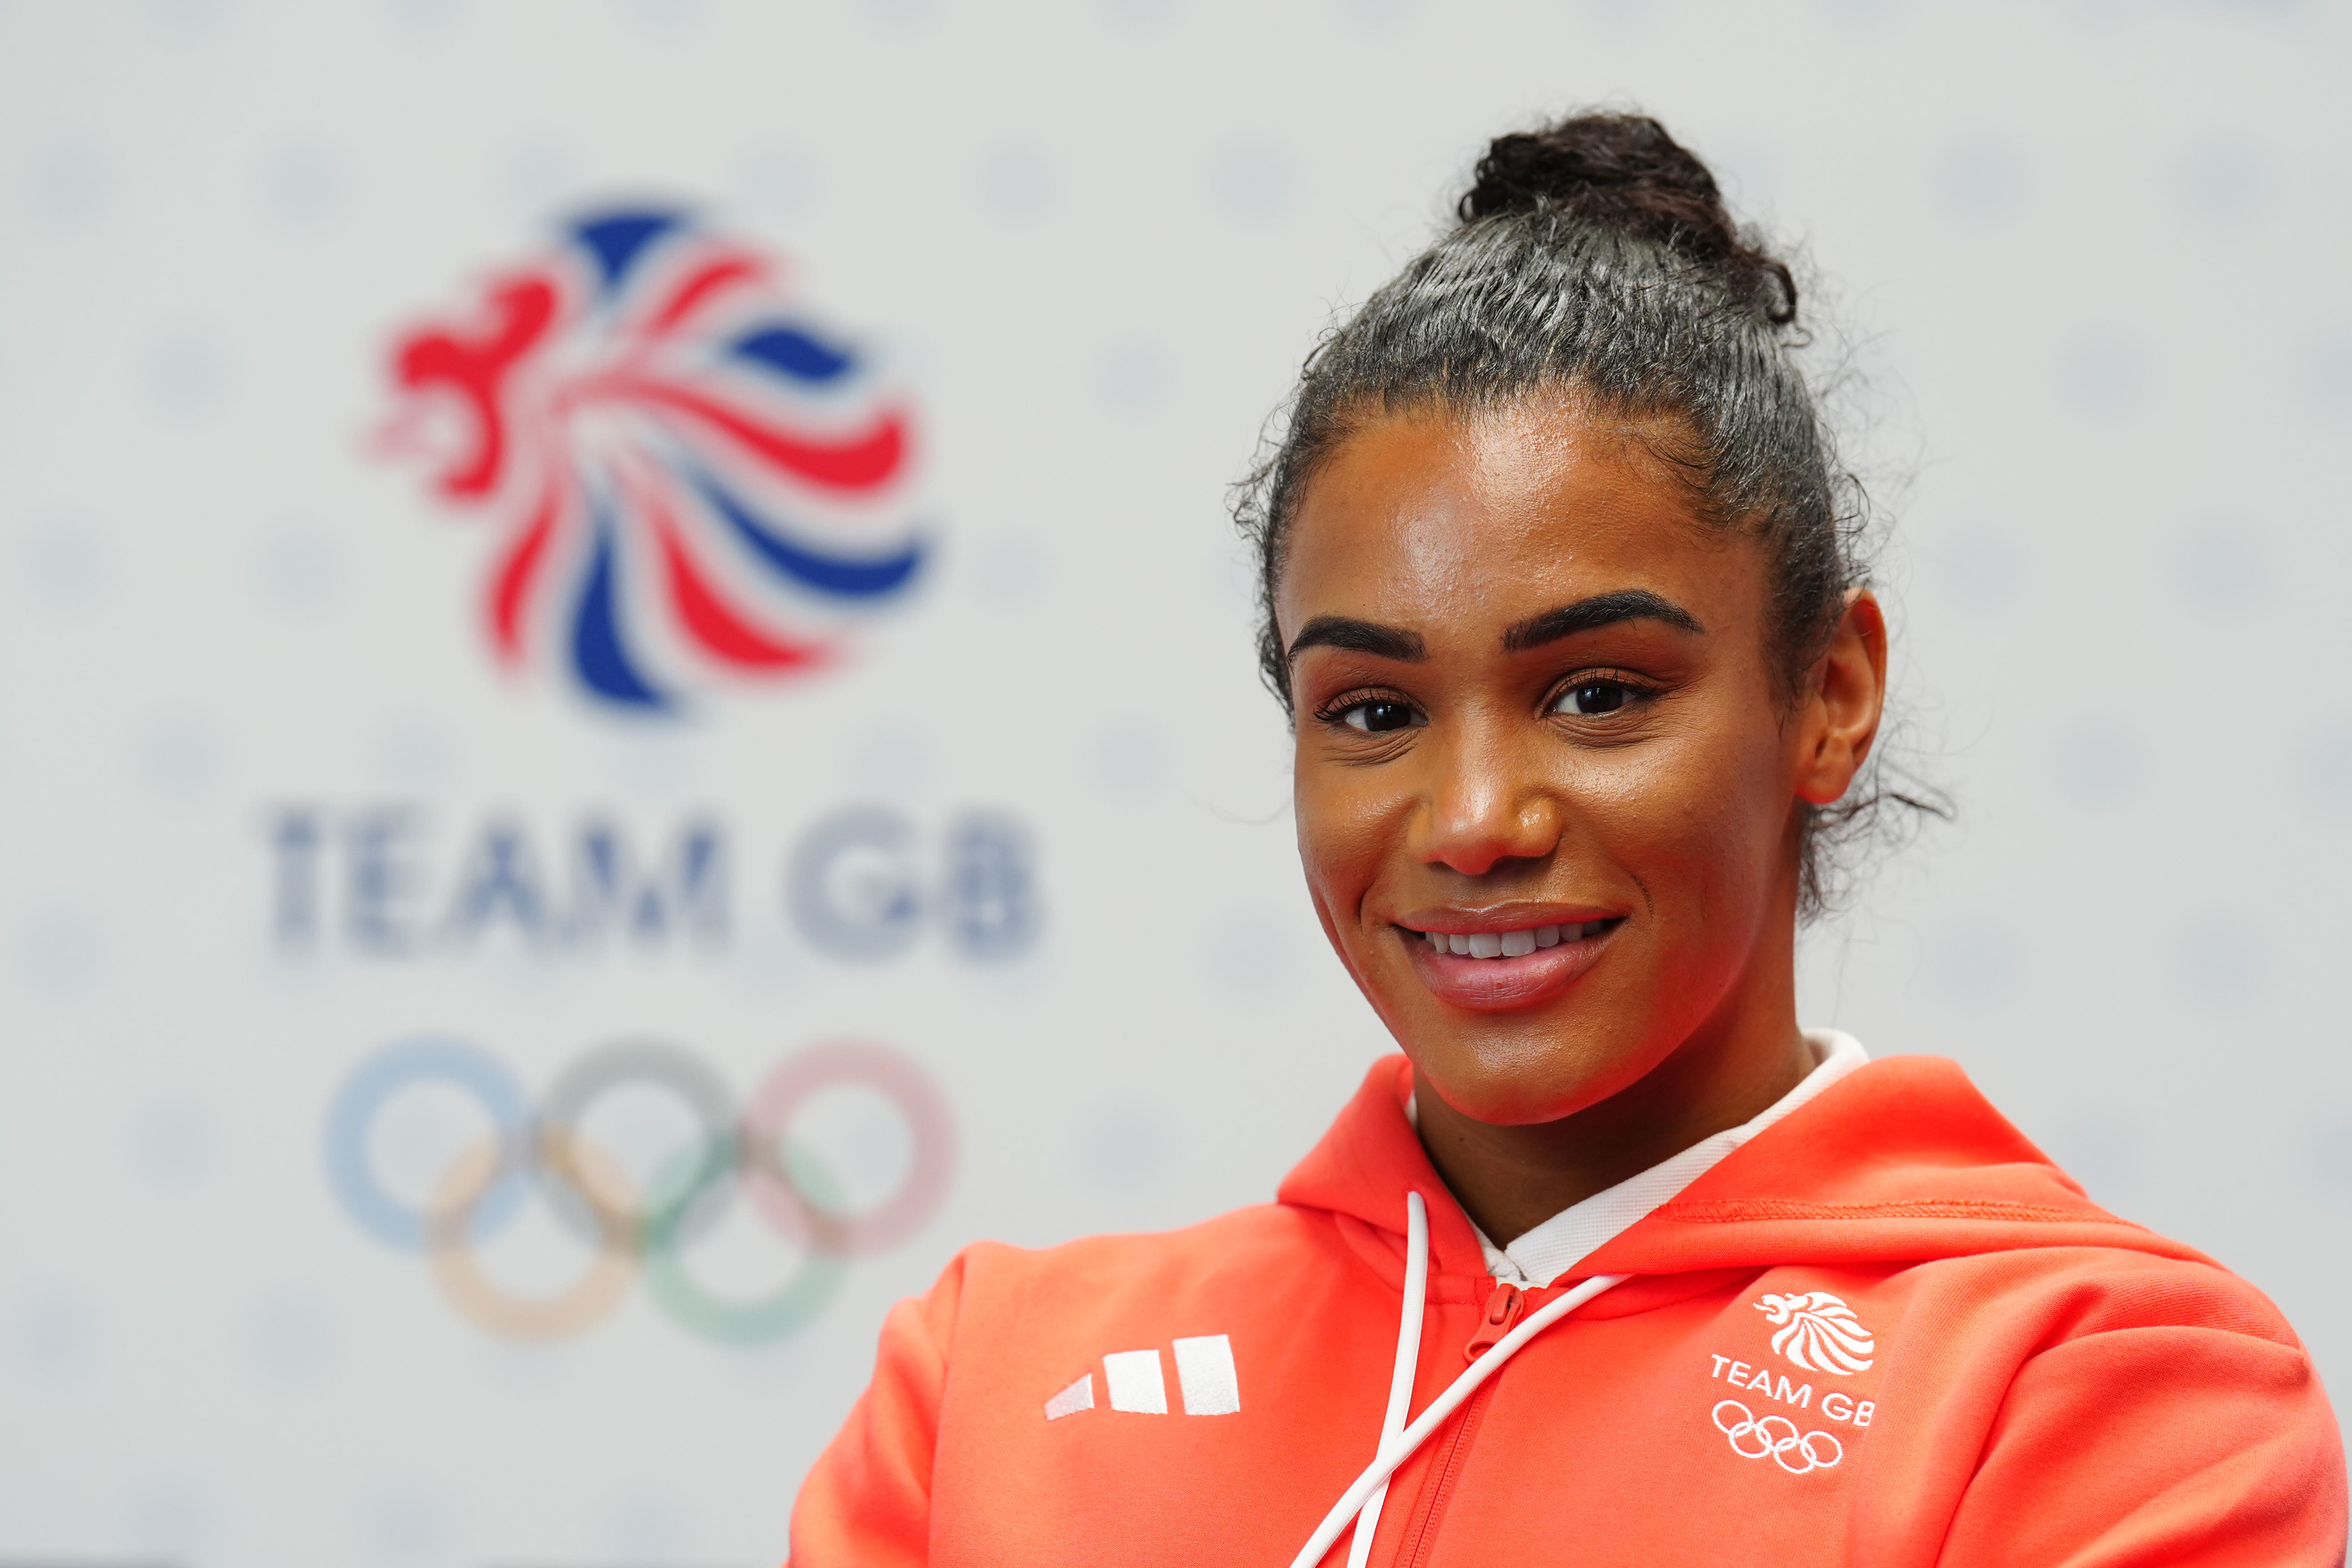 Chantelle Reid will compete at Paris 2024 eight years after being forced to stop boxing